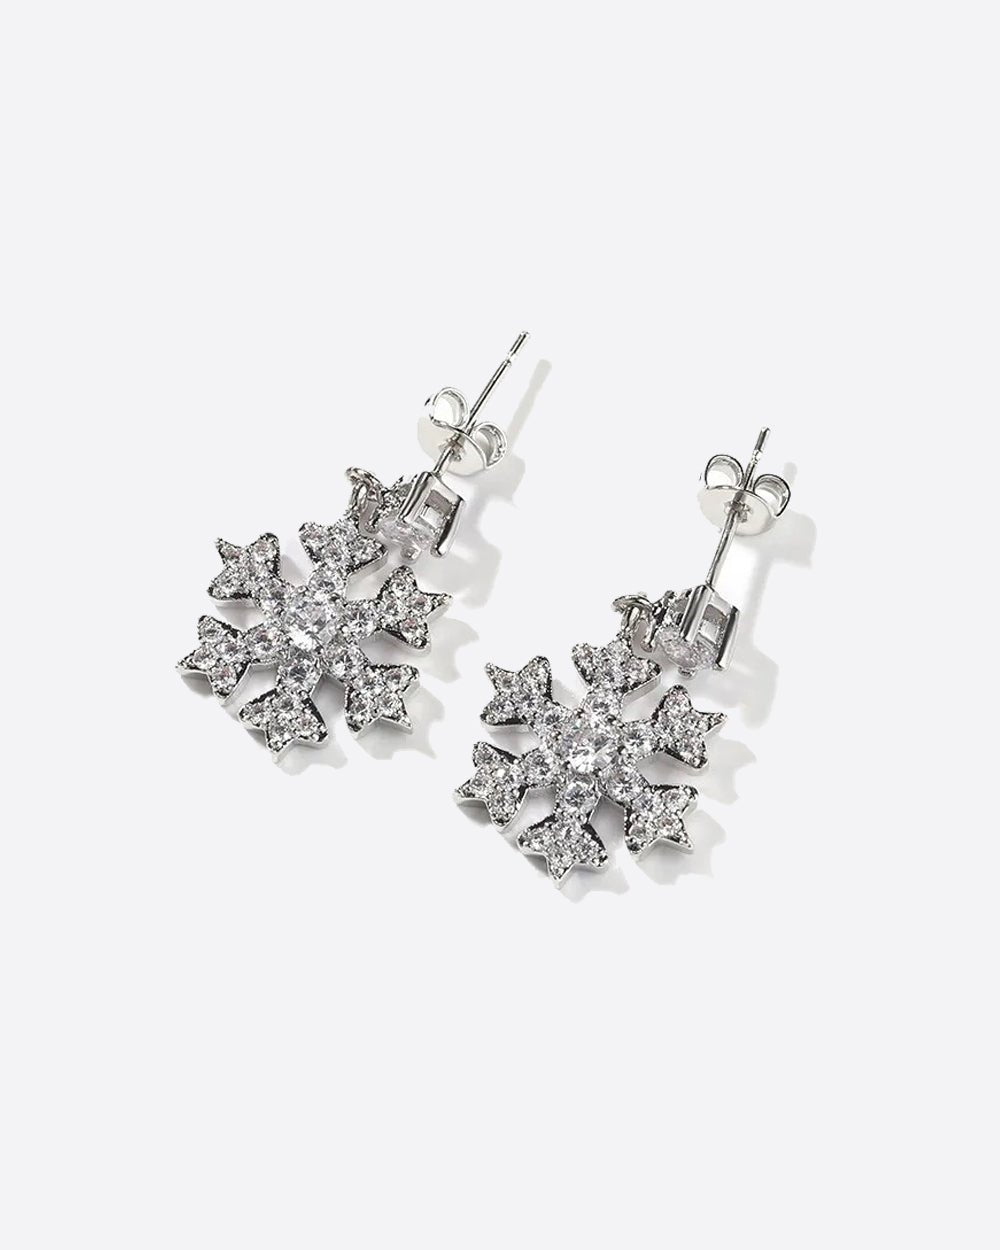 ICY SNOWFLAKE EARRINGS. - WHITE GOLD